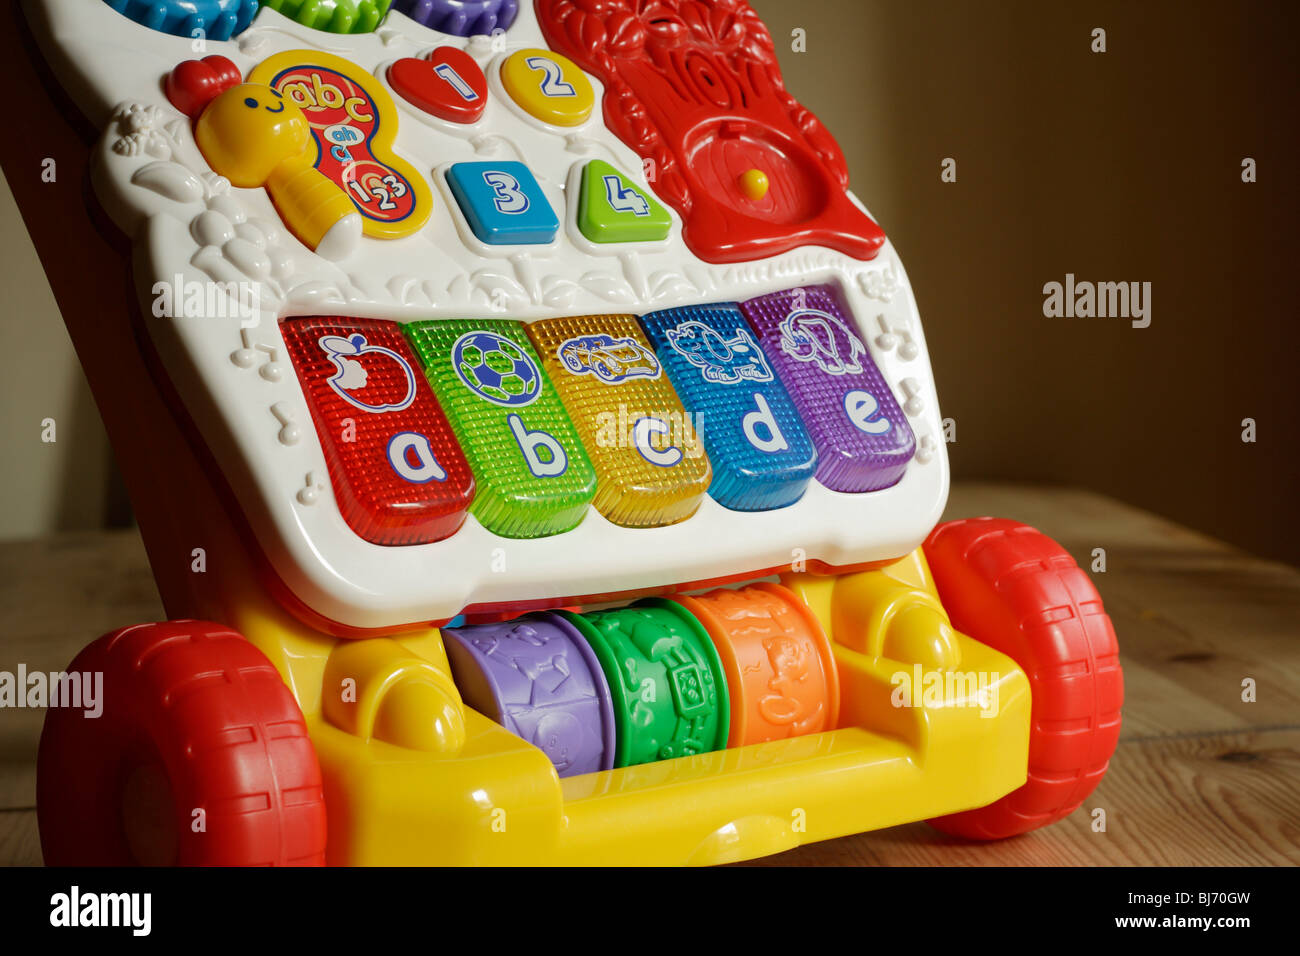 Baby stroller toy on table Stock Photo